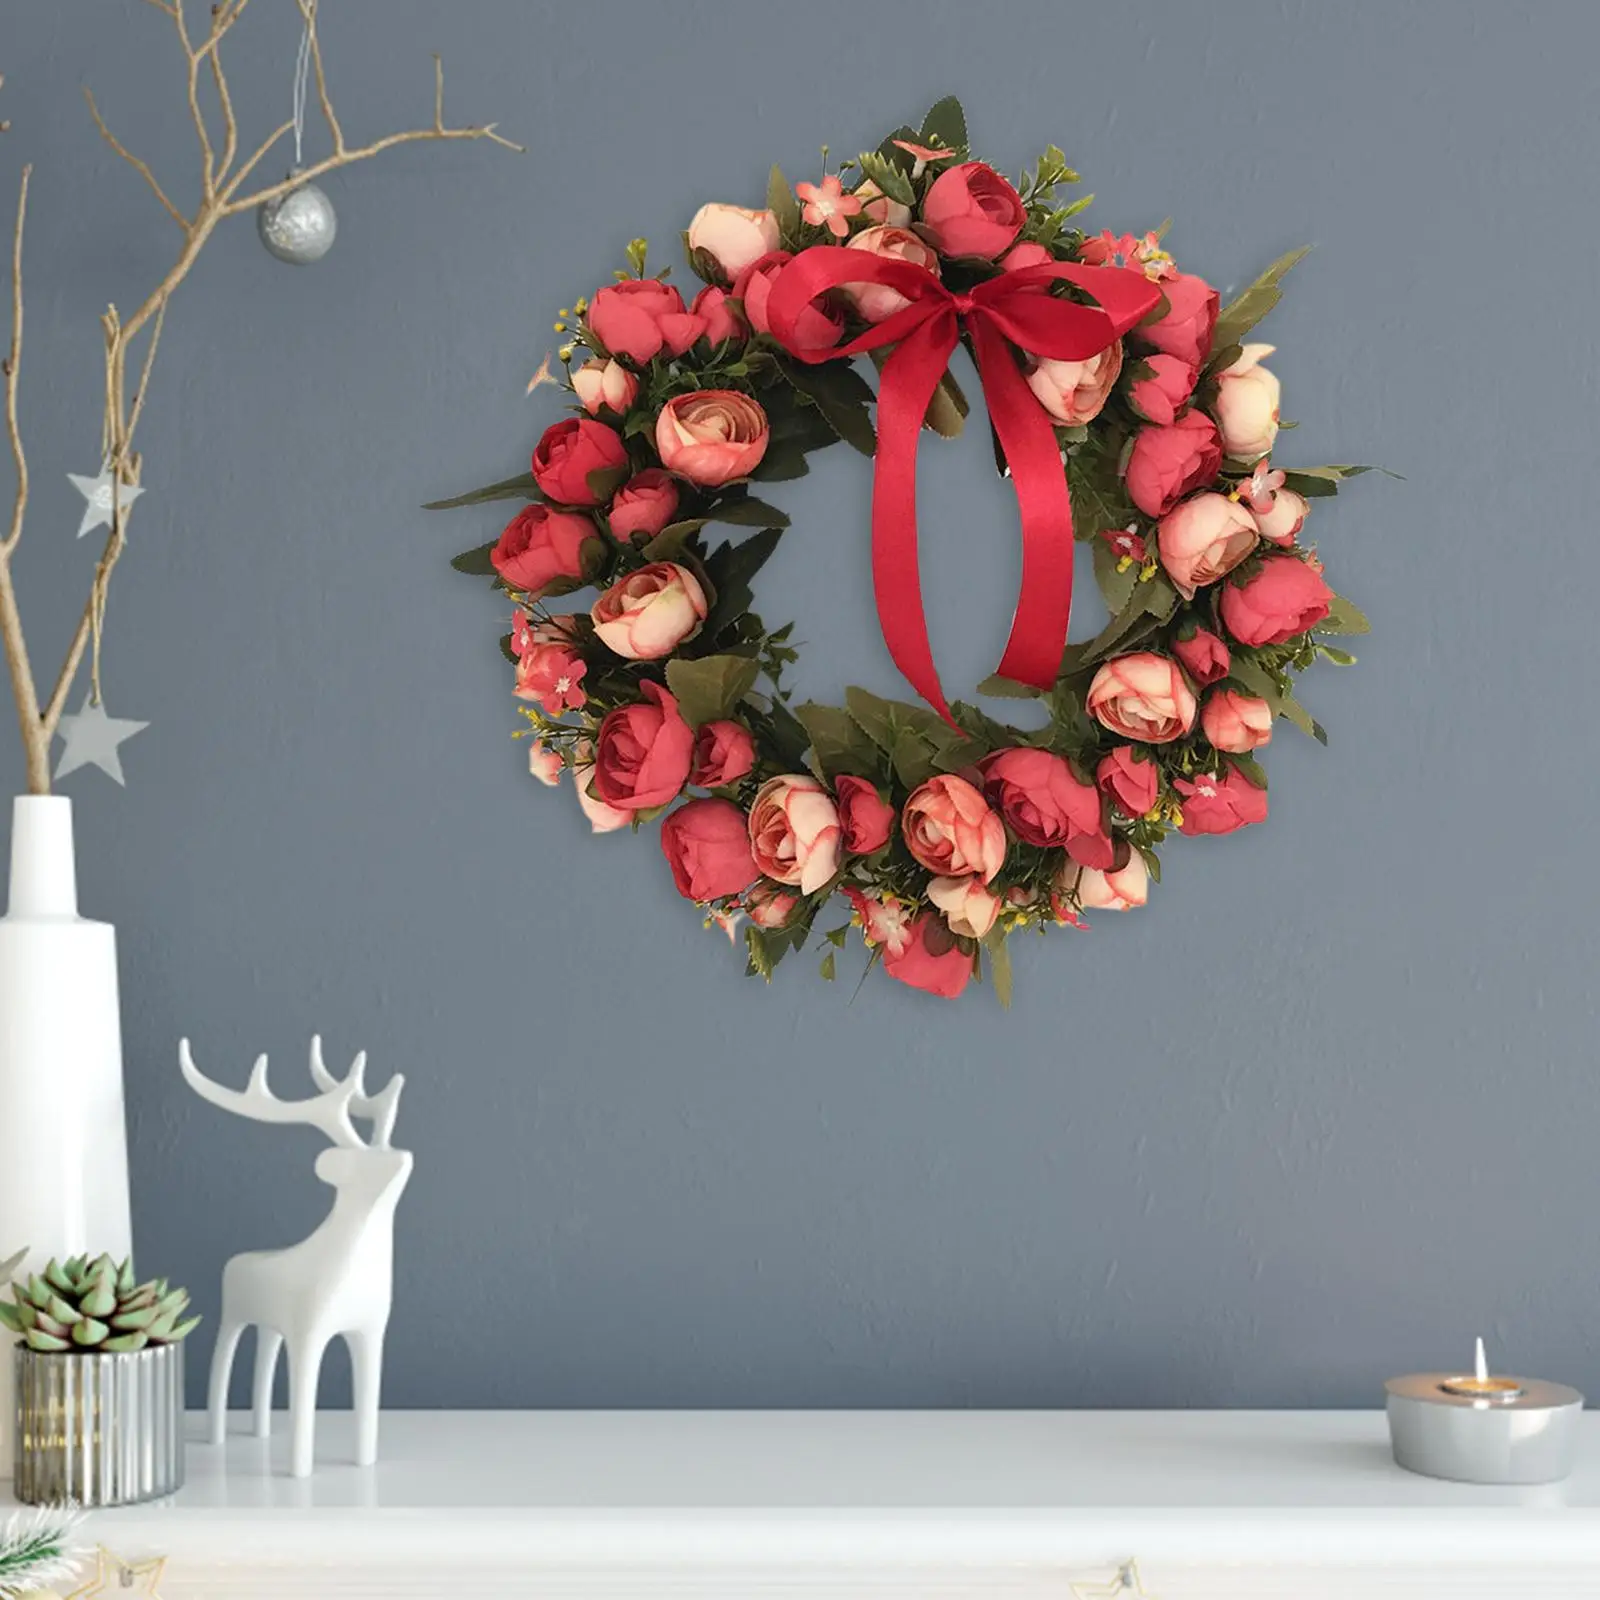 Artificial Flowers Wreaths Hanging with Green Leaves Seasonal Floral Garland Rose Wreath for Porch Ceremony Backdrop 30cm Decor